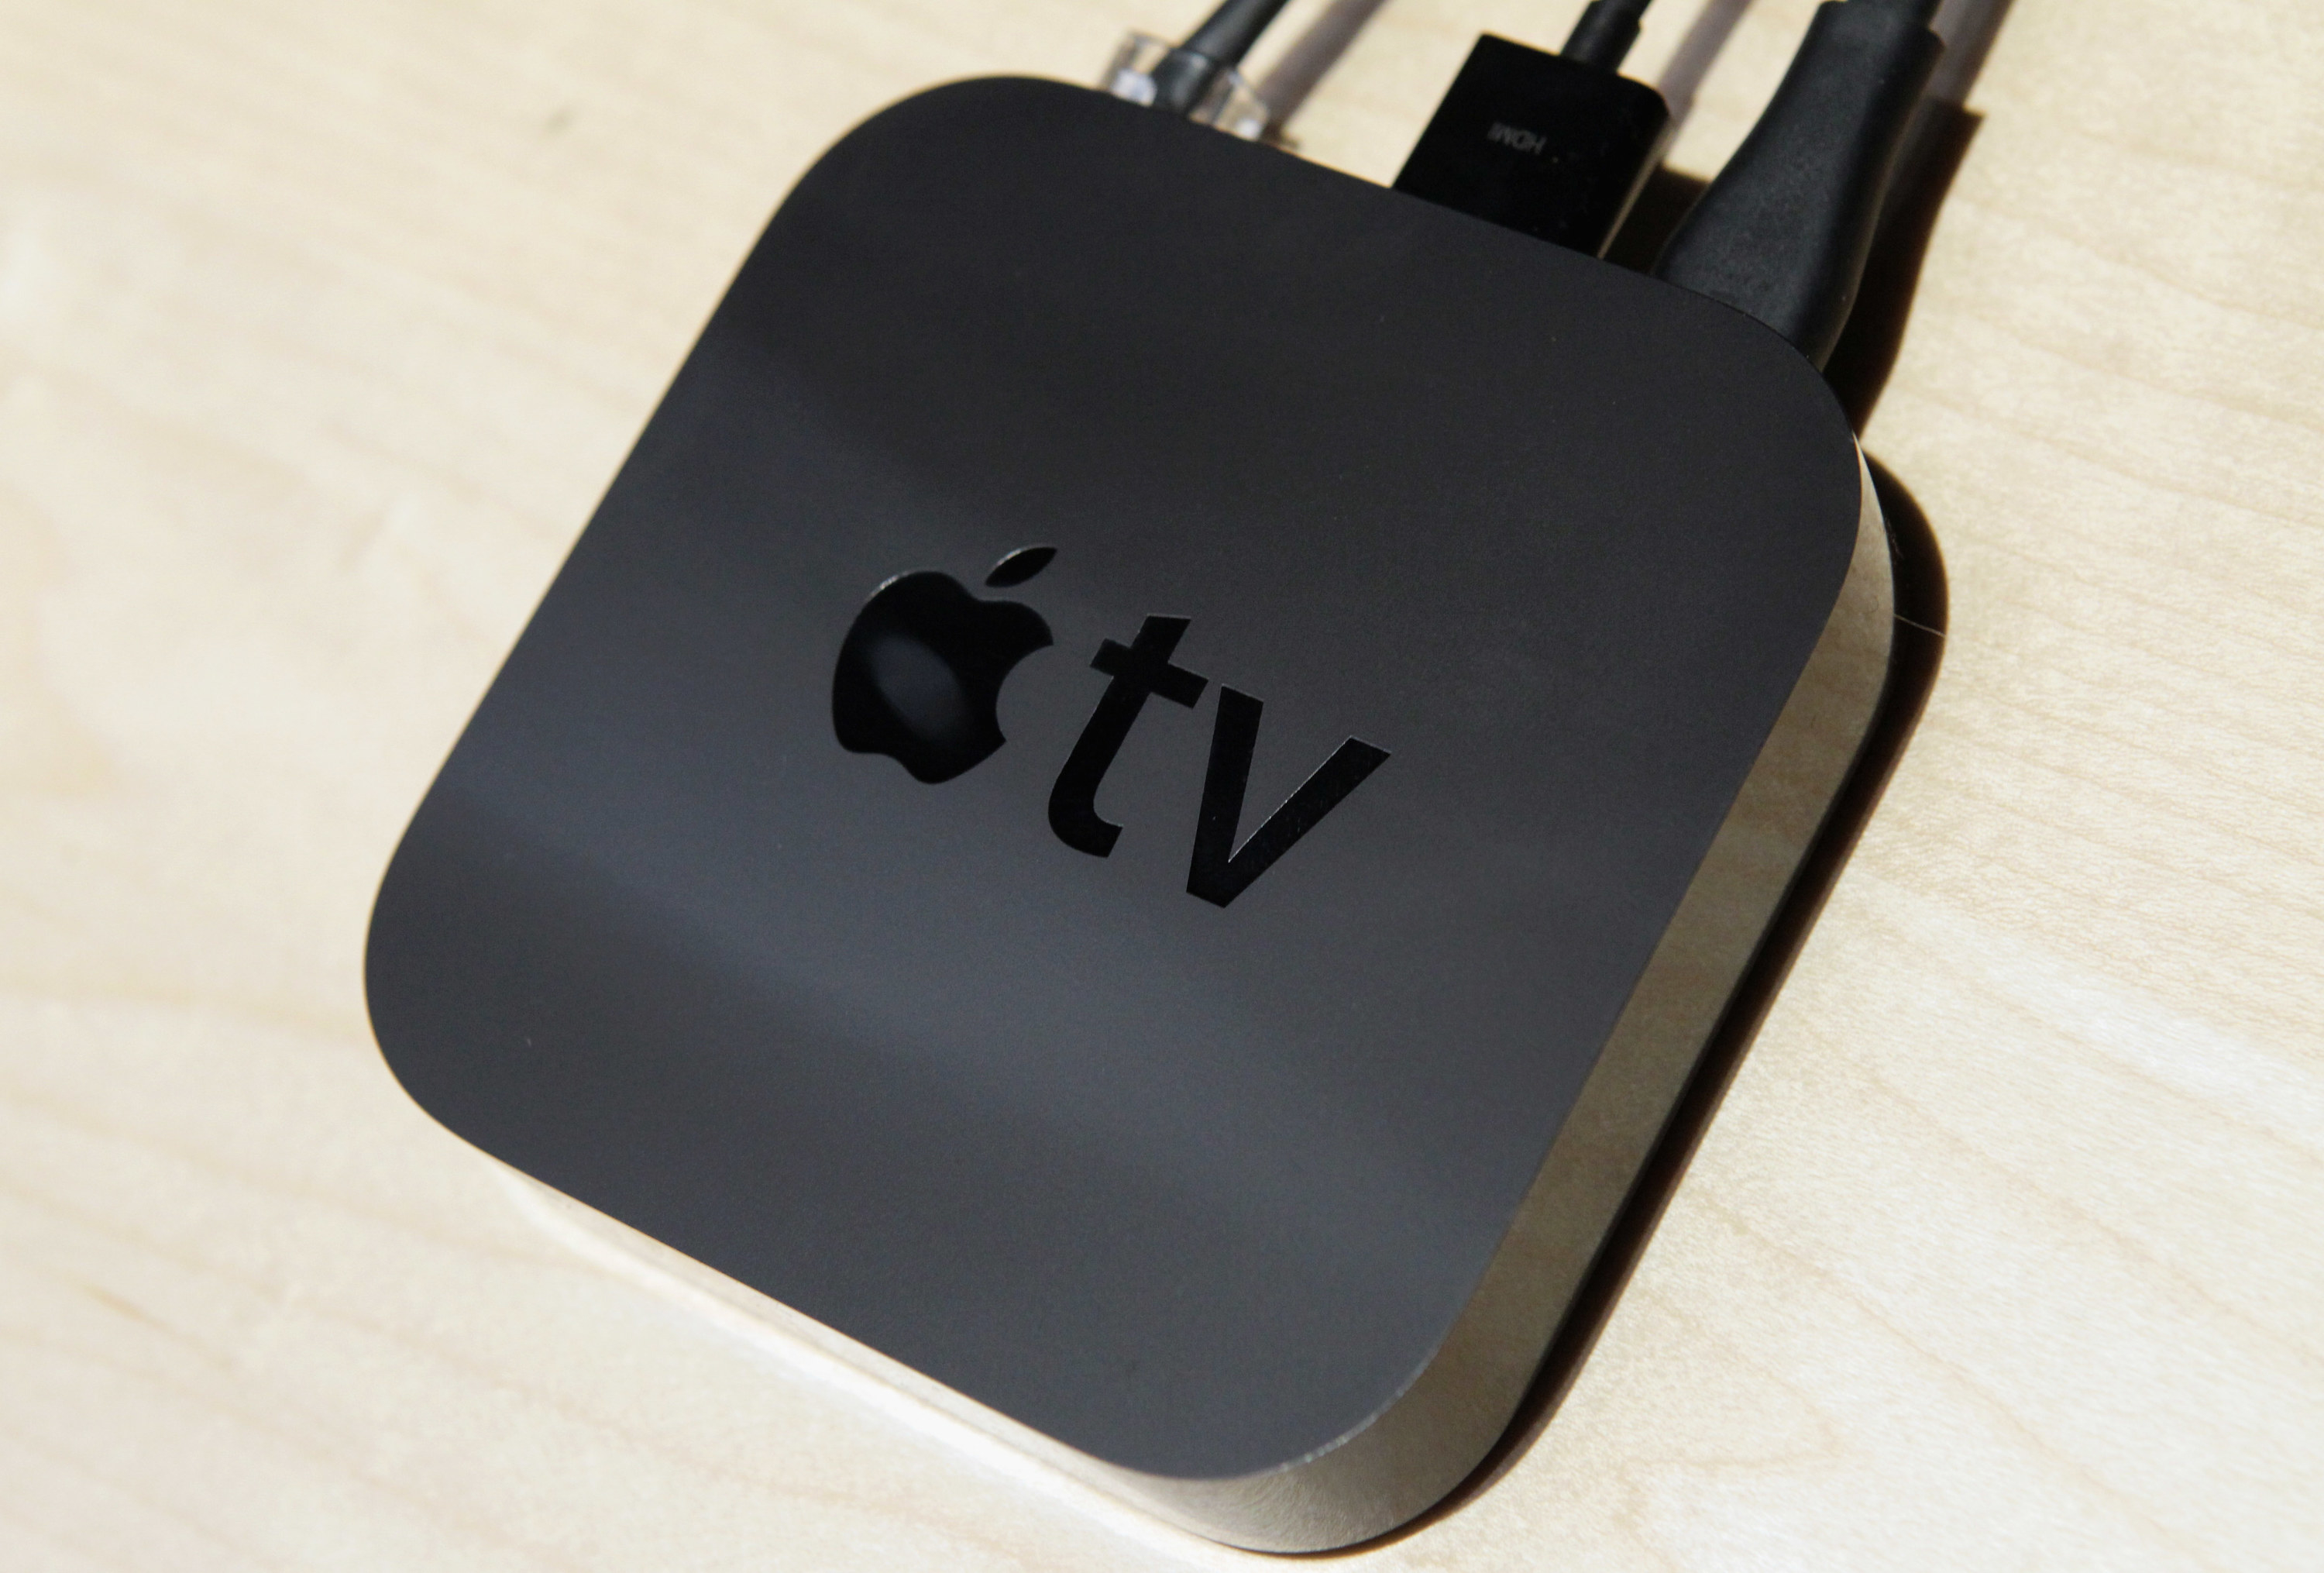 A photo of second generation Apple TV with wires attached to it